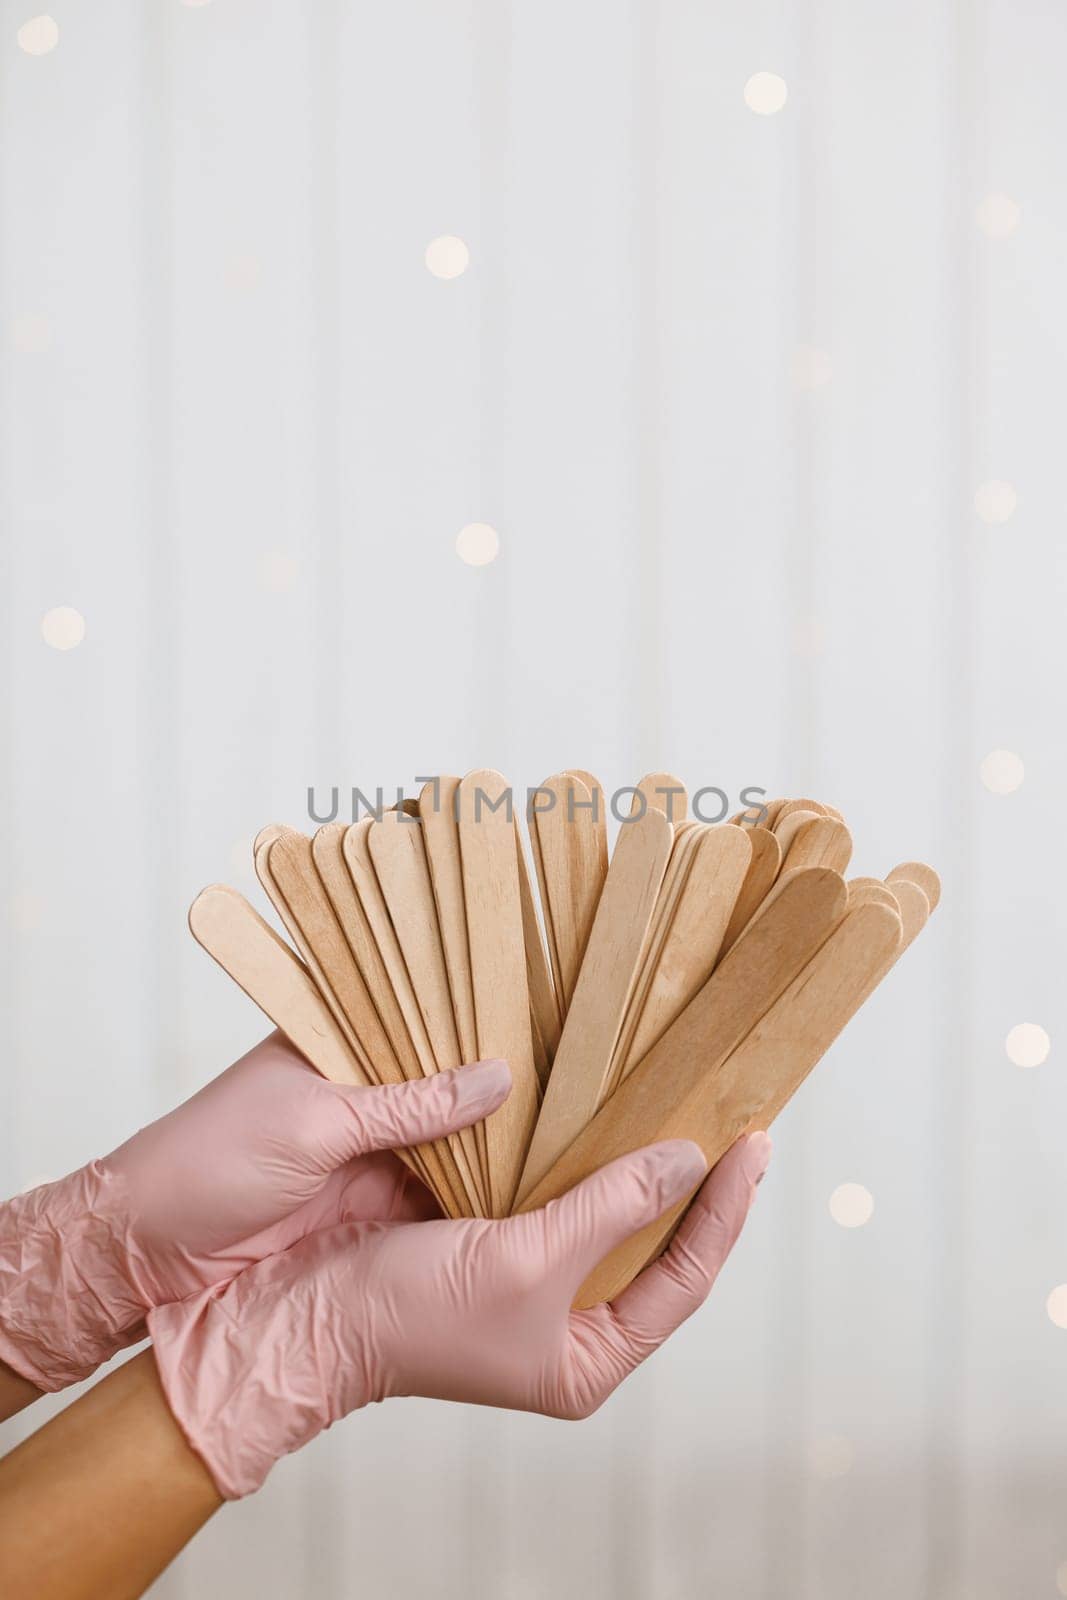 Woman holding many wax wooden spatulas. The young woman is wearing beige clothing and in pink medical gloves. The concept of depilation, waxing, sugaring smooth skin without hair, banner, copy space. by uflypro